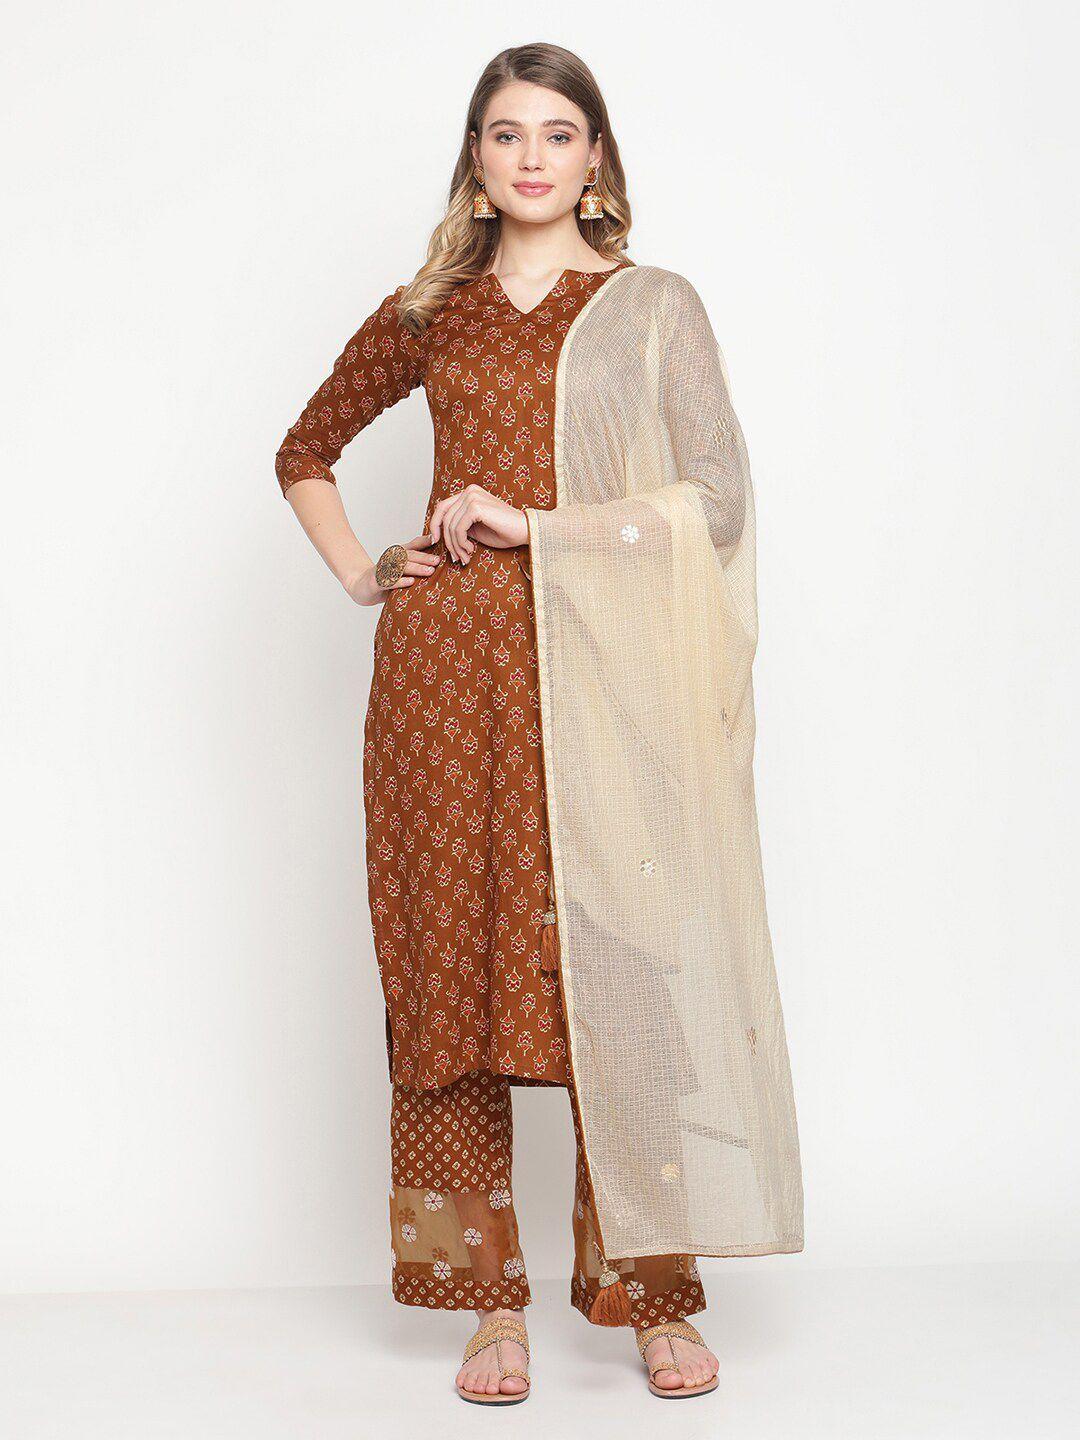 stylee-lifestyle-brown-&-beige-ethnic-motifs-printed-unstitched-dress-material